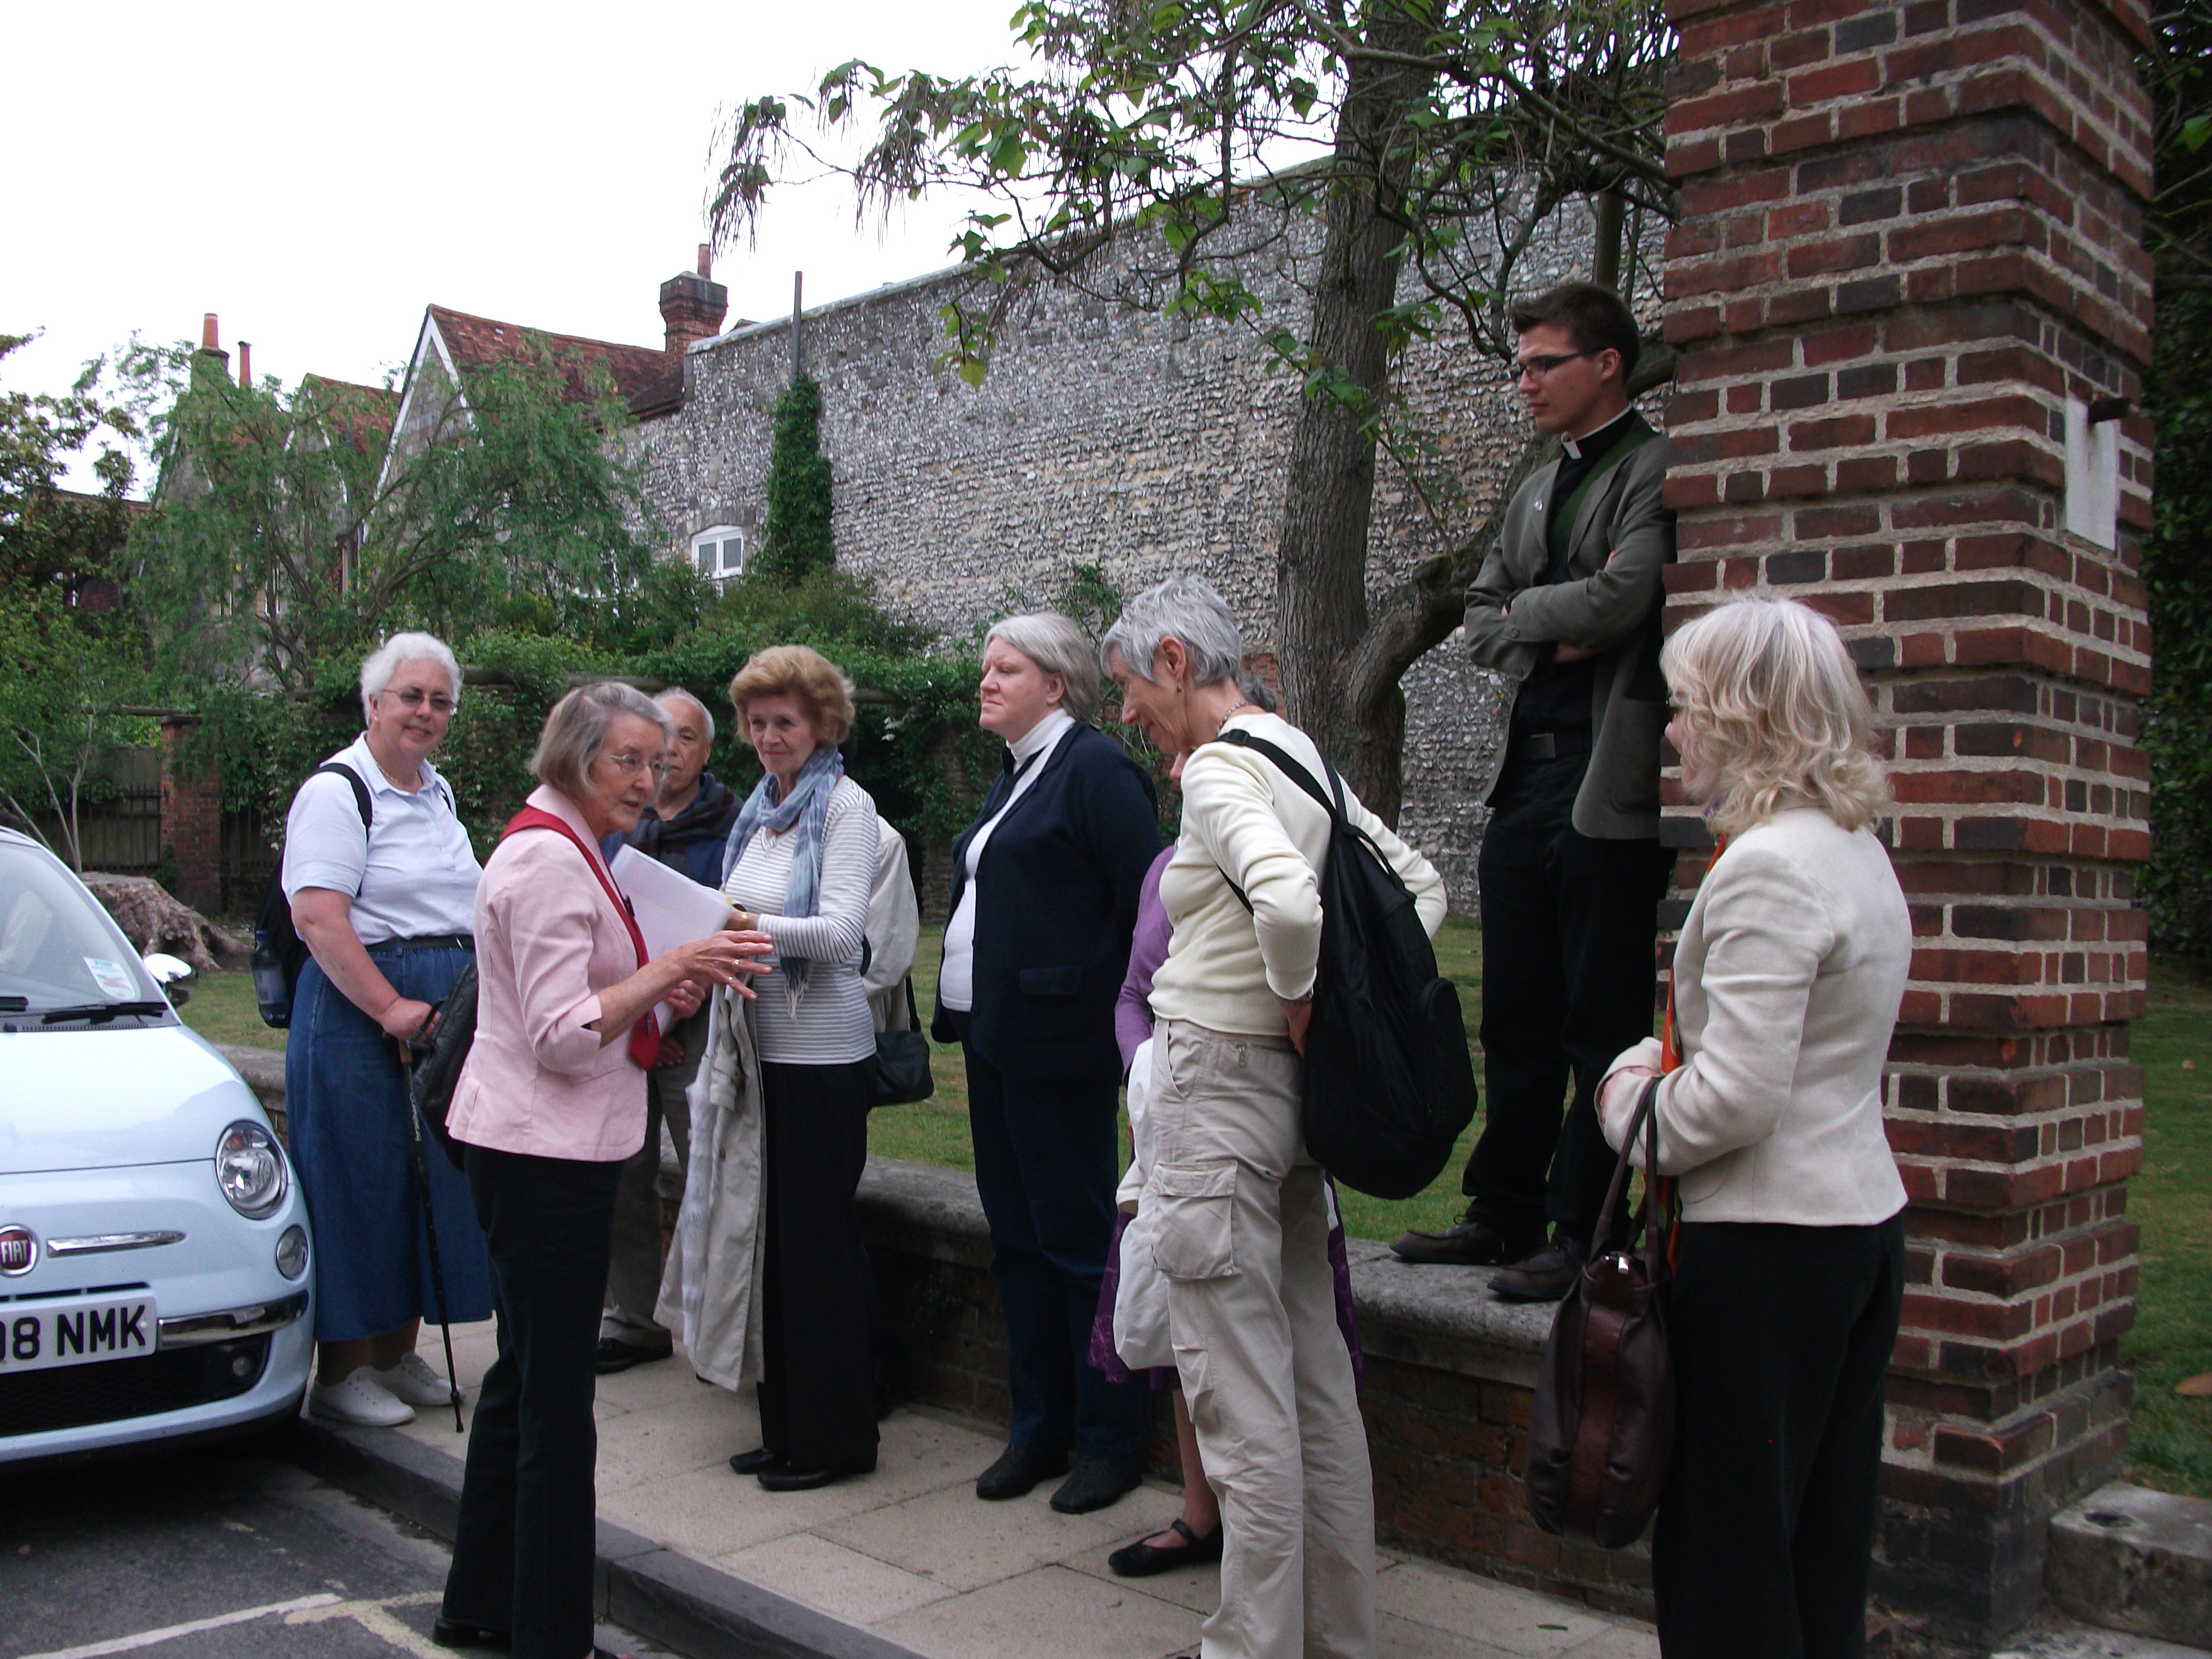 On a Jane Austen tour of Winchester